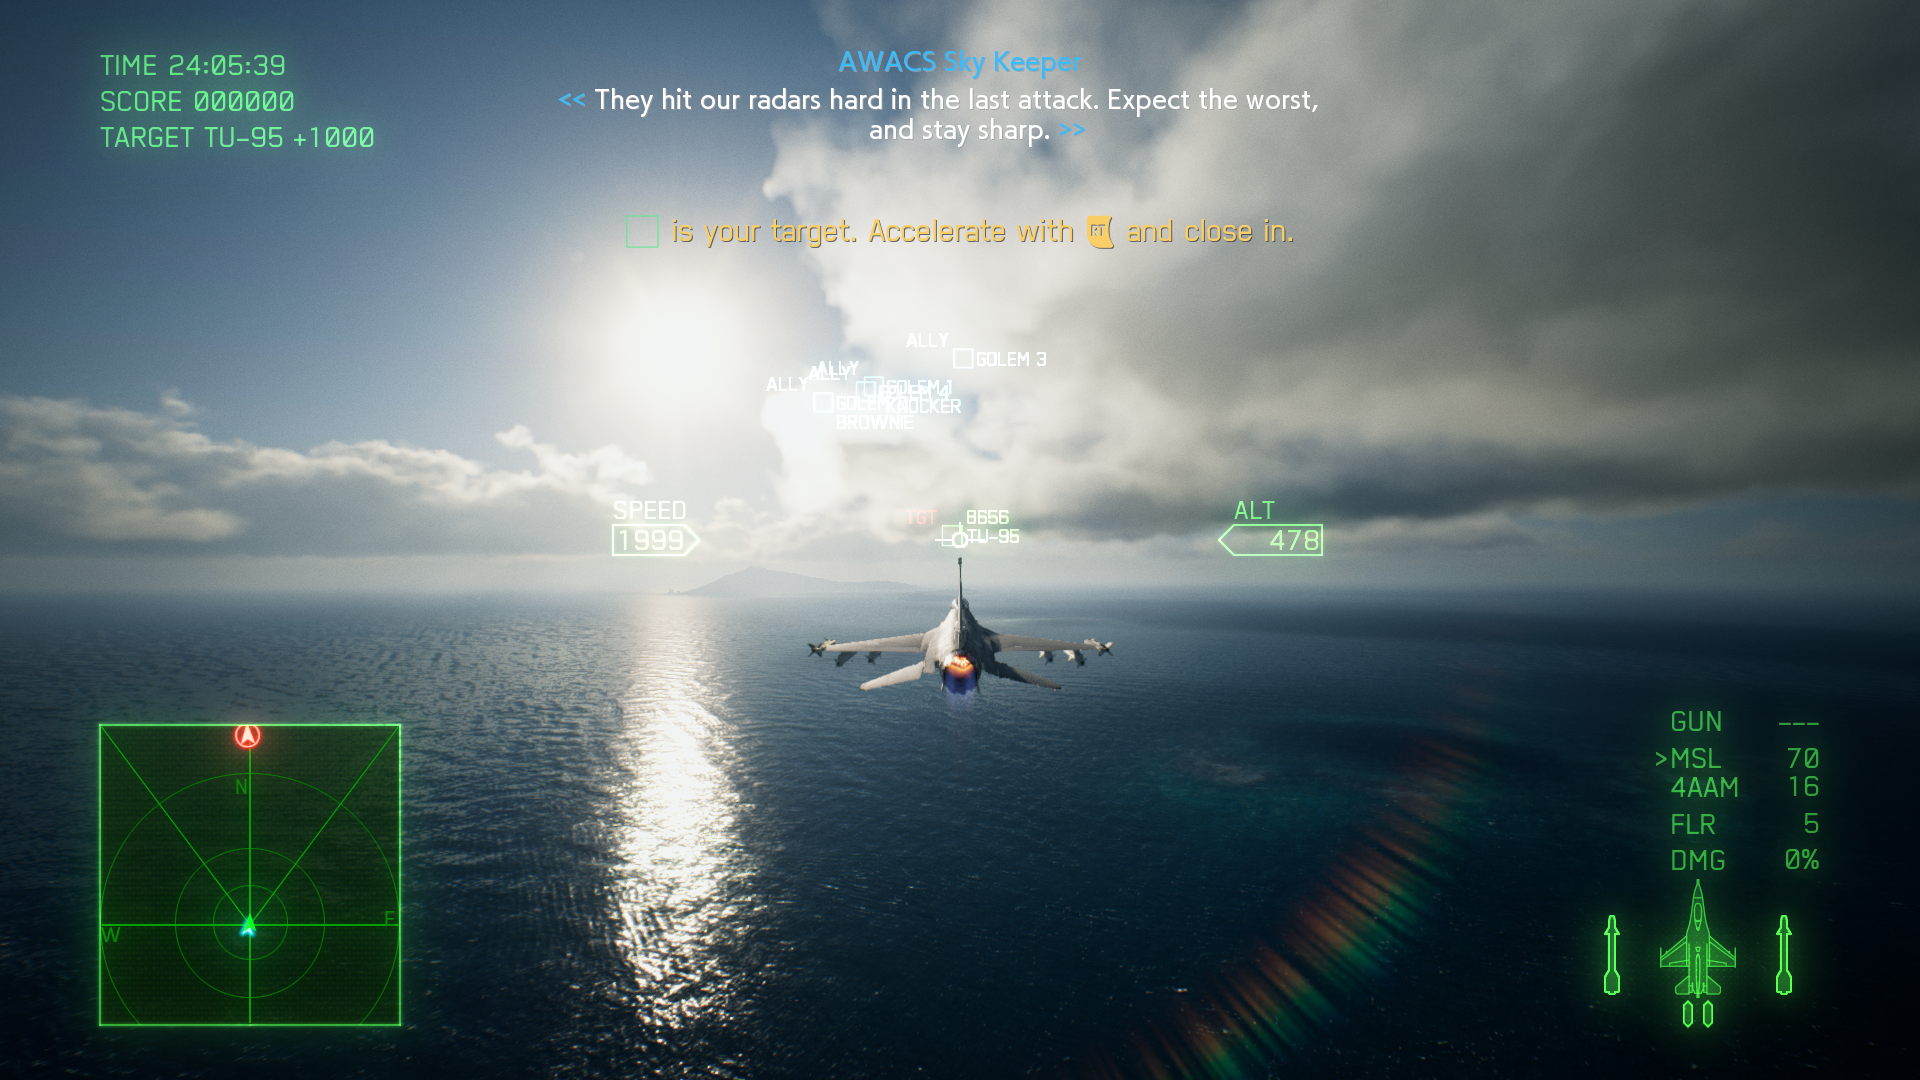 Ace7Game_2019_02_03_01_09_59_481.png